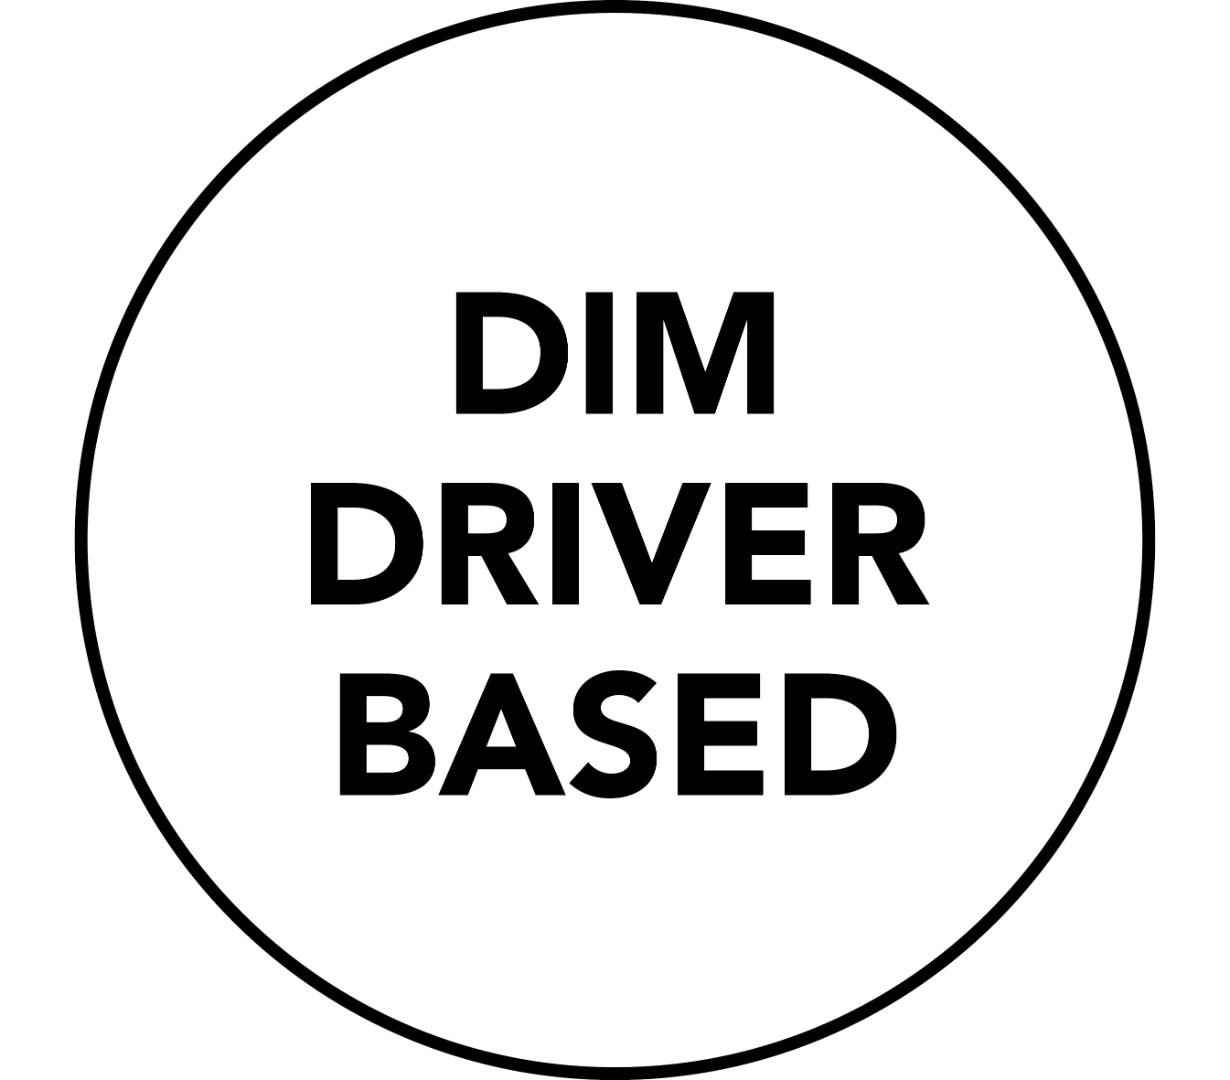 Dimmable based on driver used